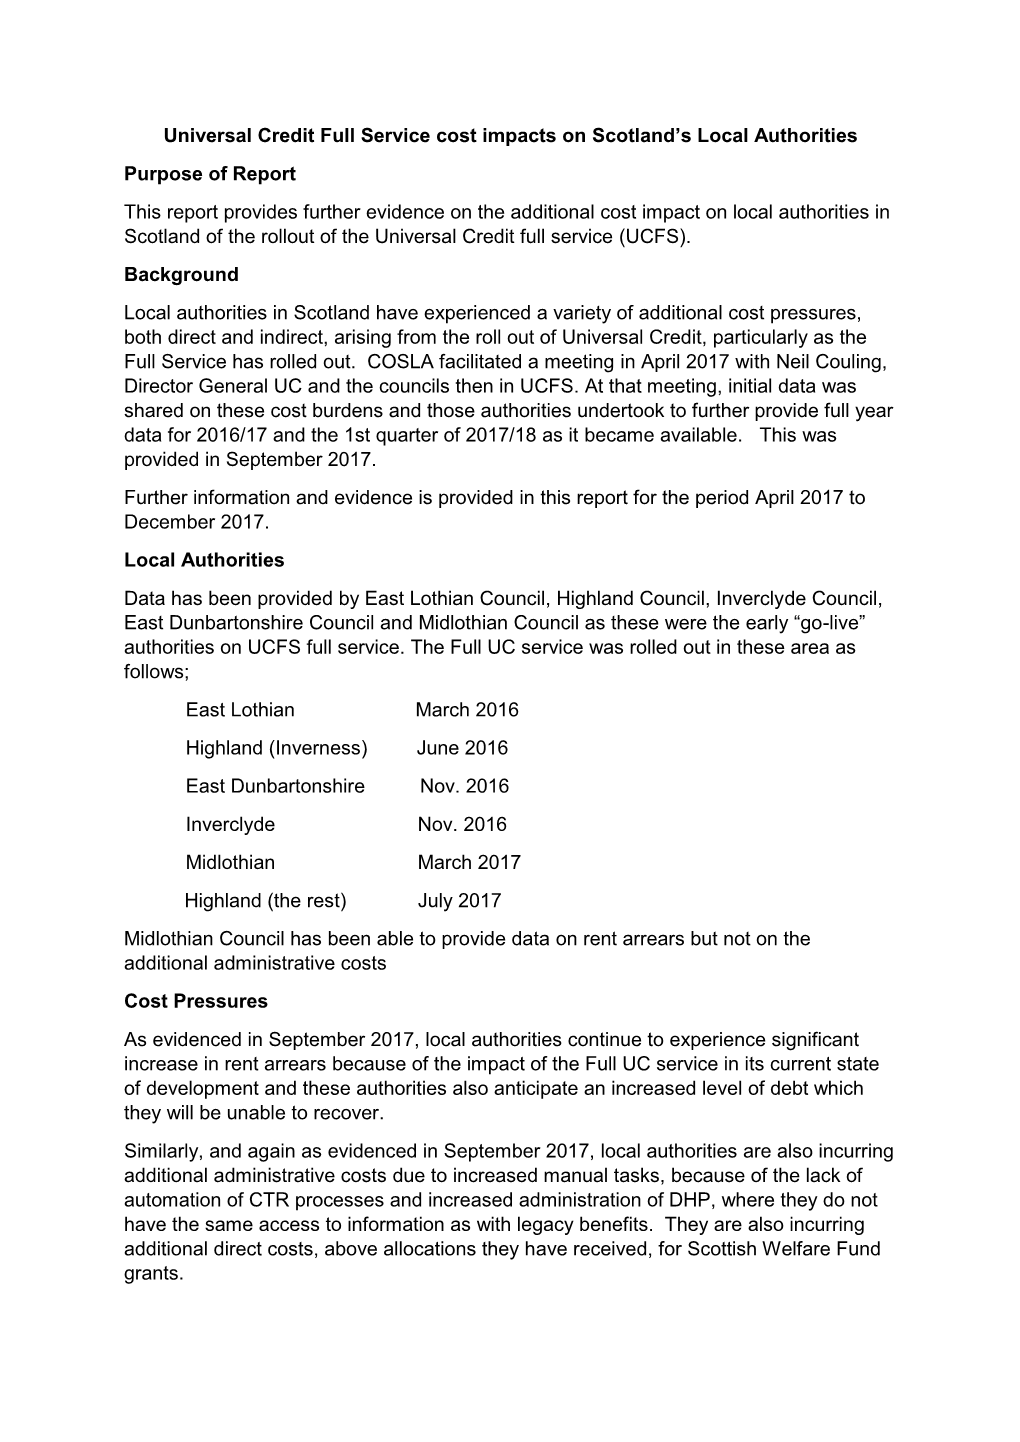 Universal Credit Full Service Cost Impacts on Scotland's Local